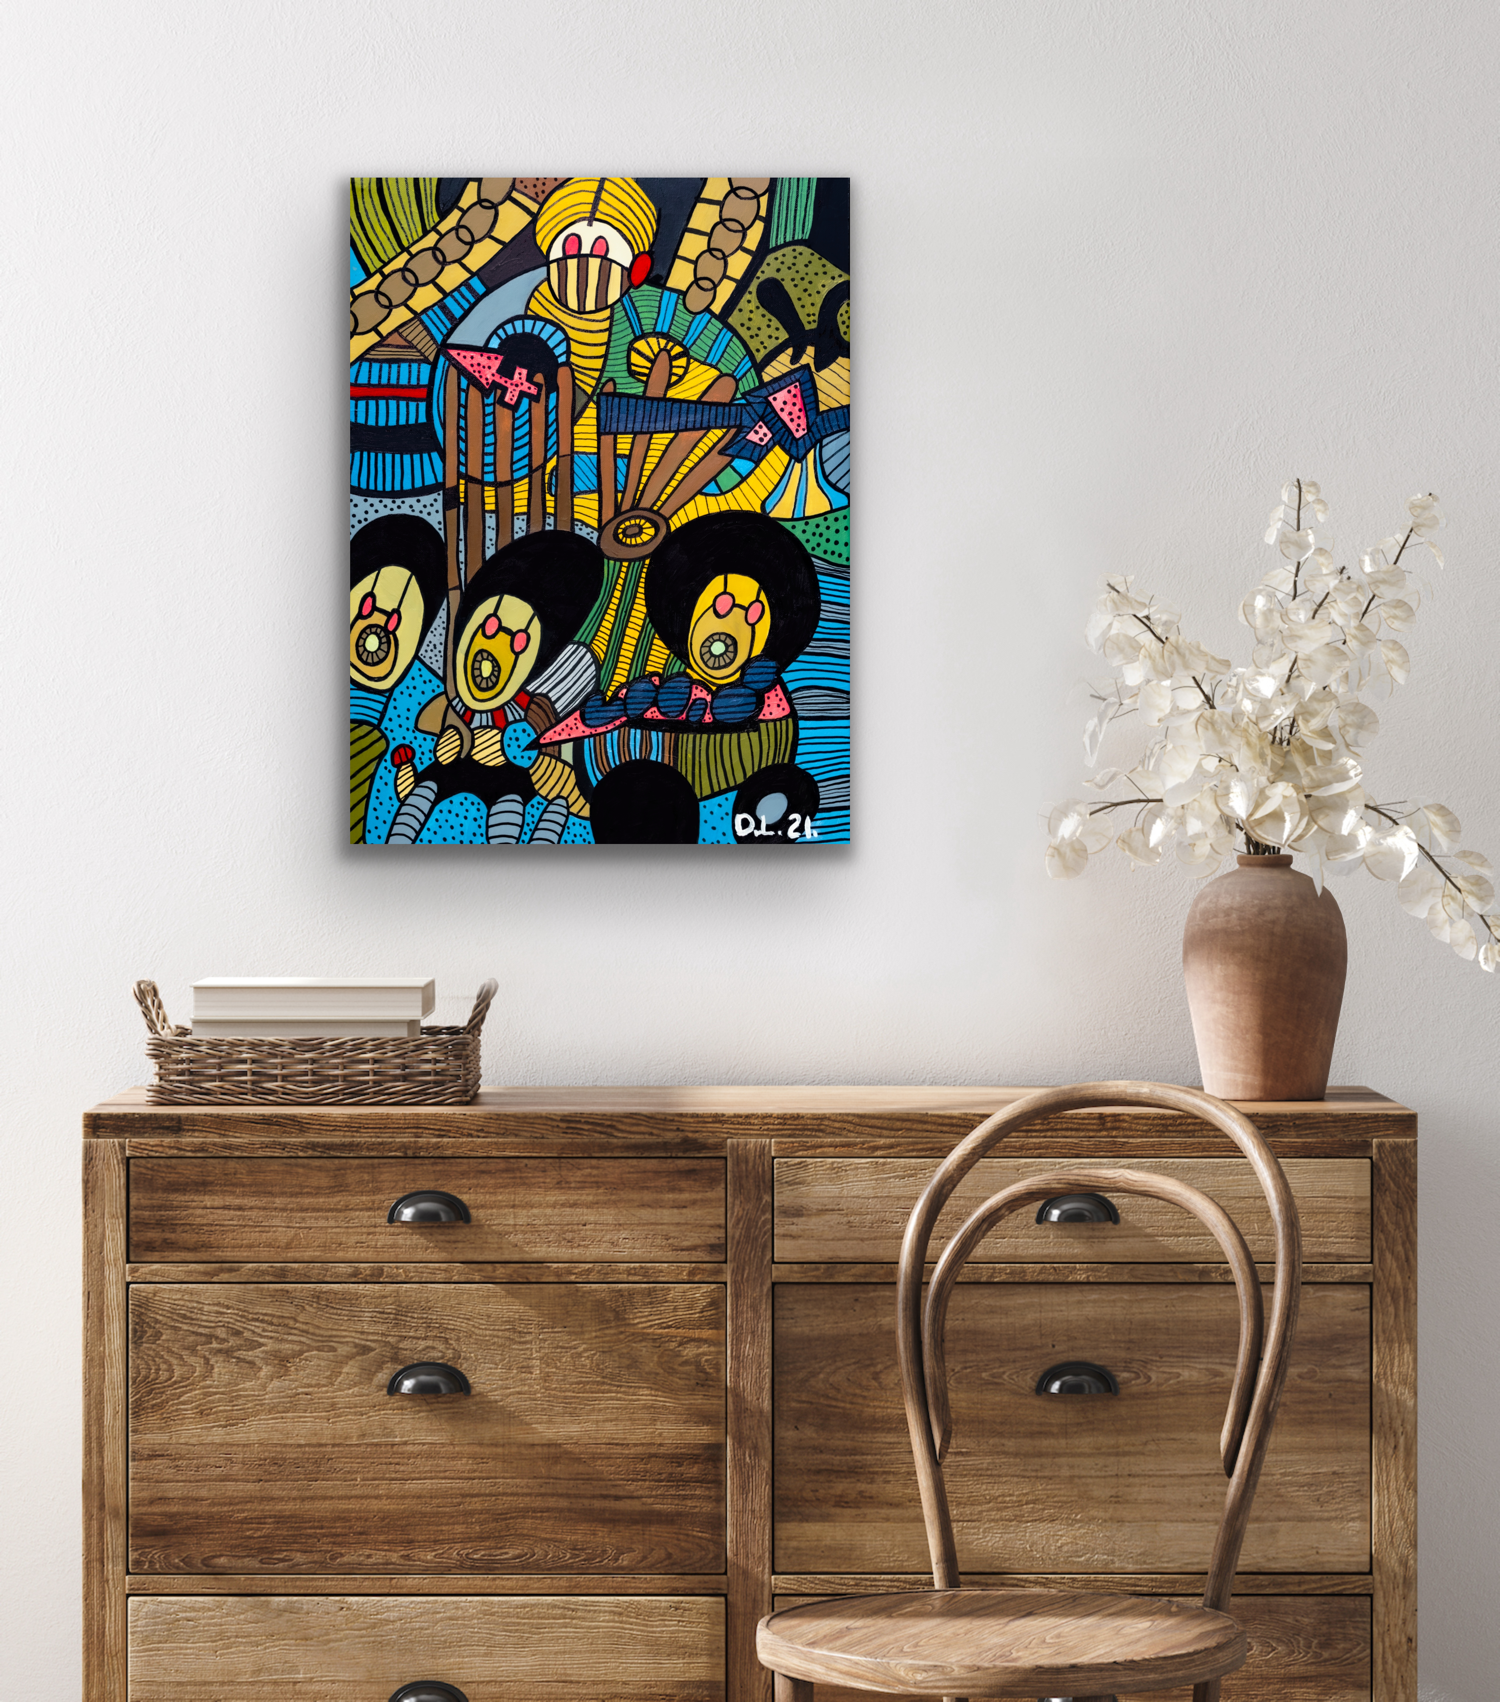 David Laird's "Fortune Tella" artwork will look great in your home and office.